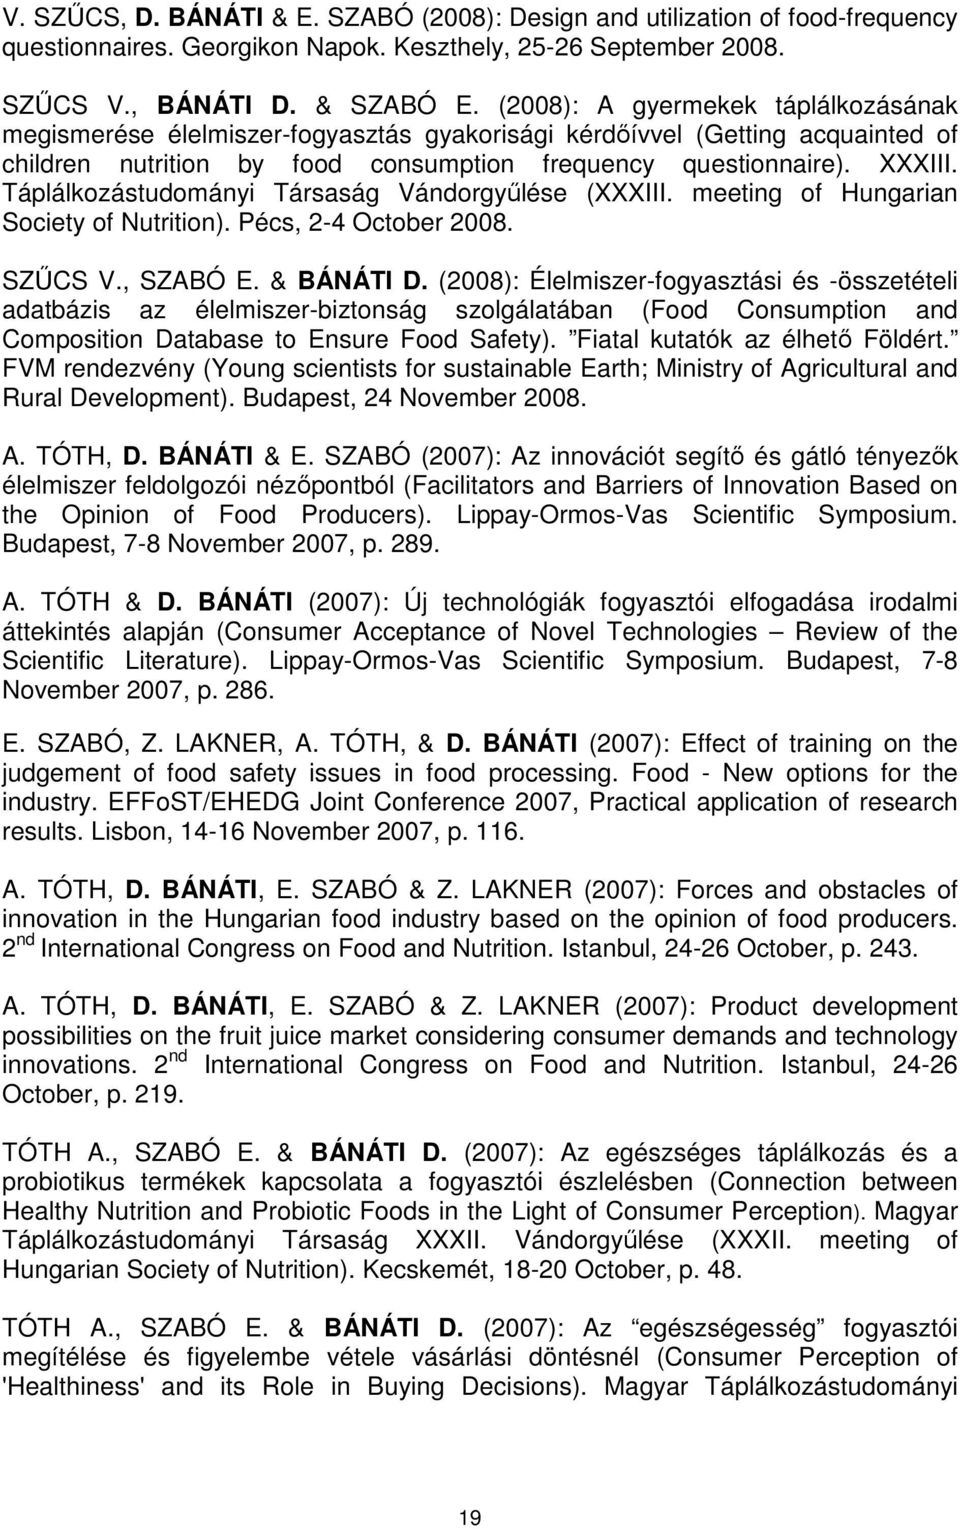 Prof. Dr. BÁNÁTI Diána - Publication List (Titles translated into English  where publications written in Hungarian) - PDF Free Download